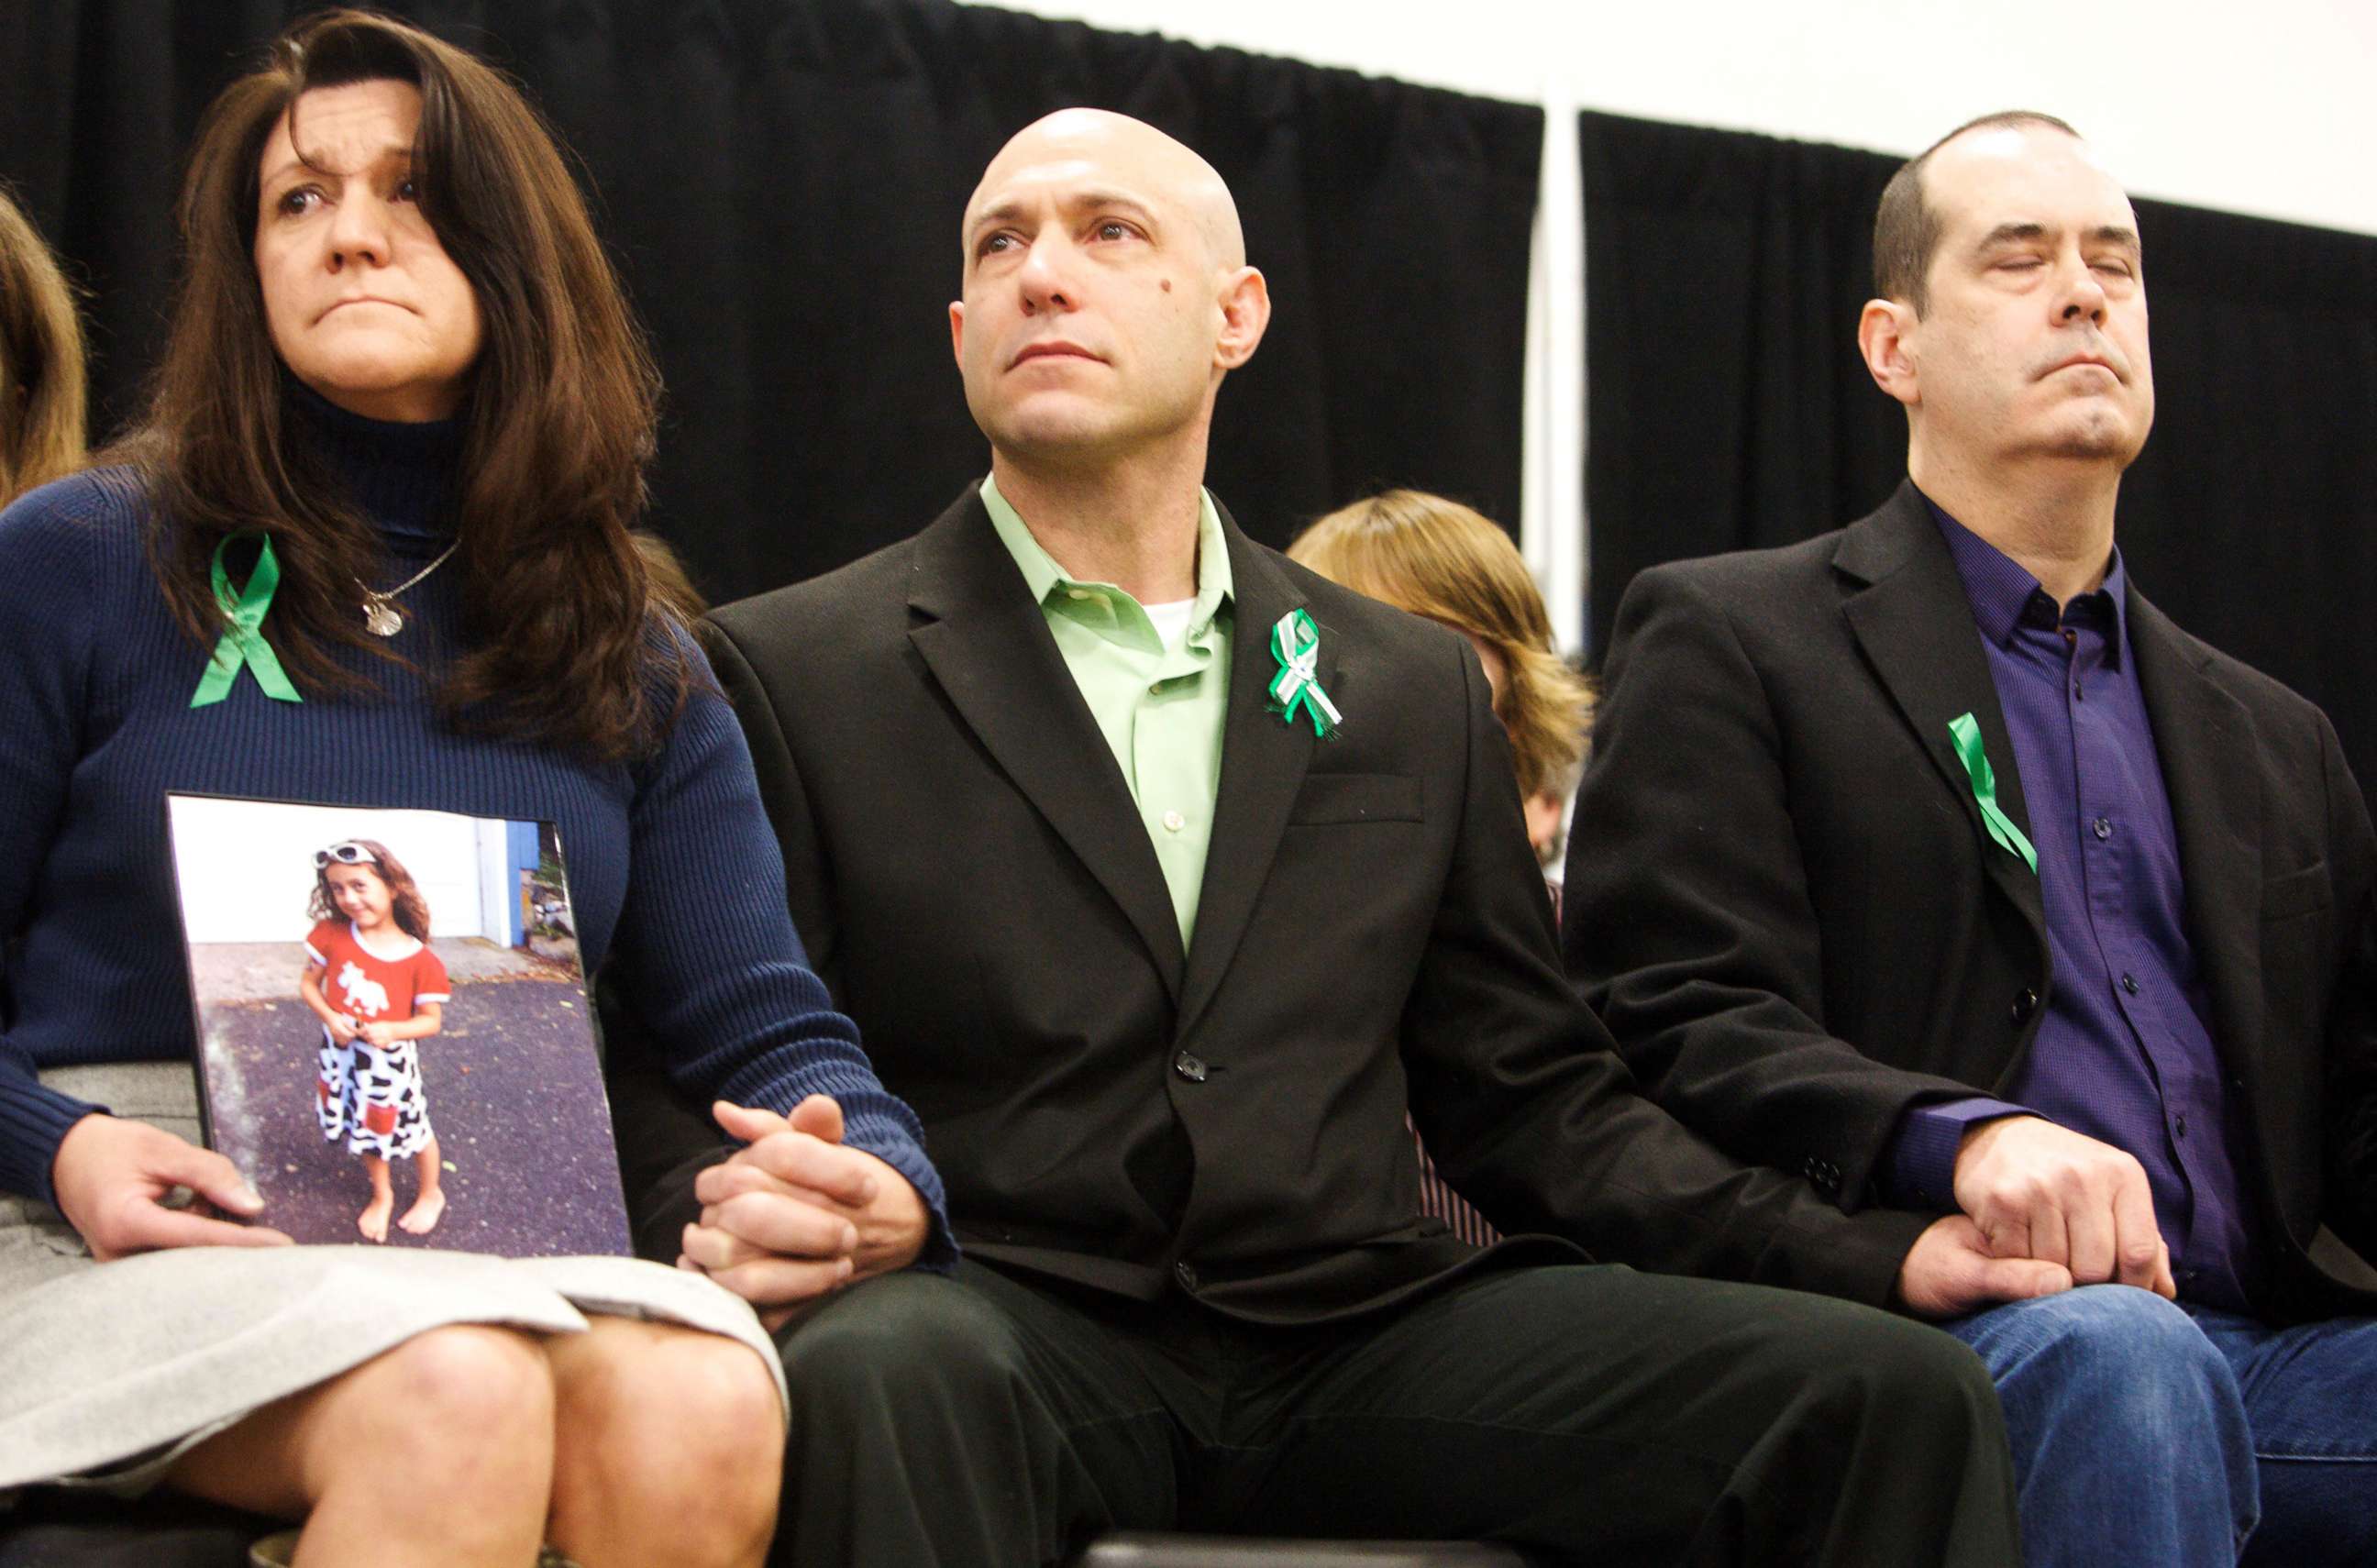 Jennifer Hensel and Jeremy Richman, the parents of Avielle Richman, the father of Benjamin Wheeler, 6, victims of the Dec. 14, 2012 shooting at Sandy Hook Elementary School, attend the launch of The Sandy Hook Promise in Newtown, Conn., Jan. 14, 2013.